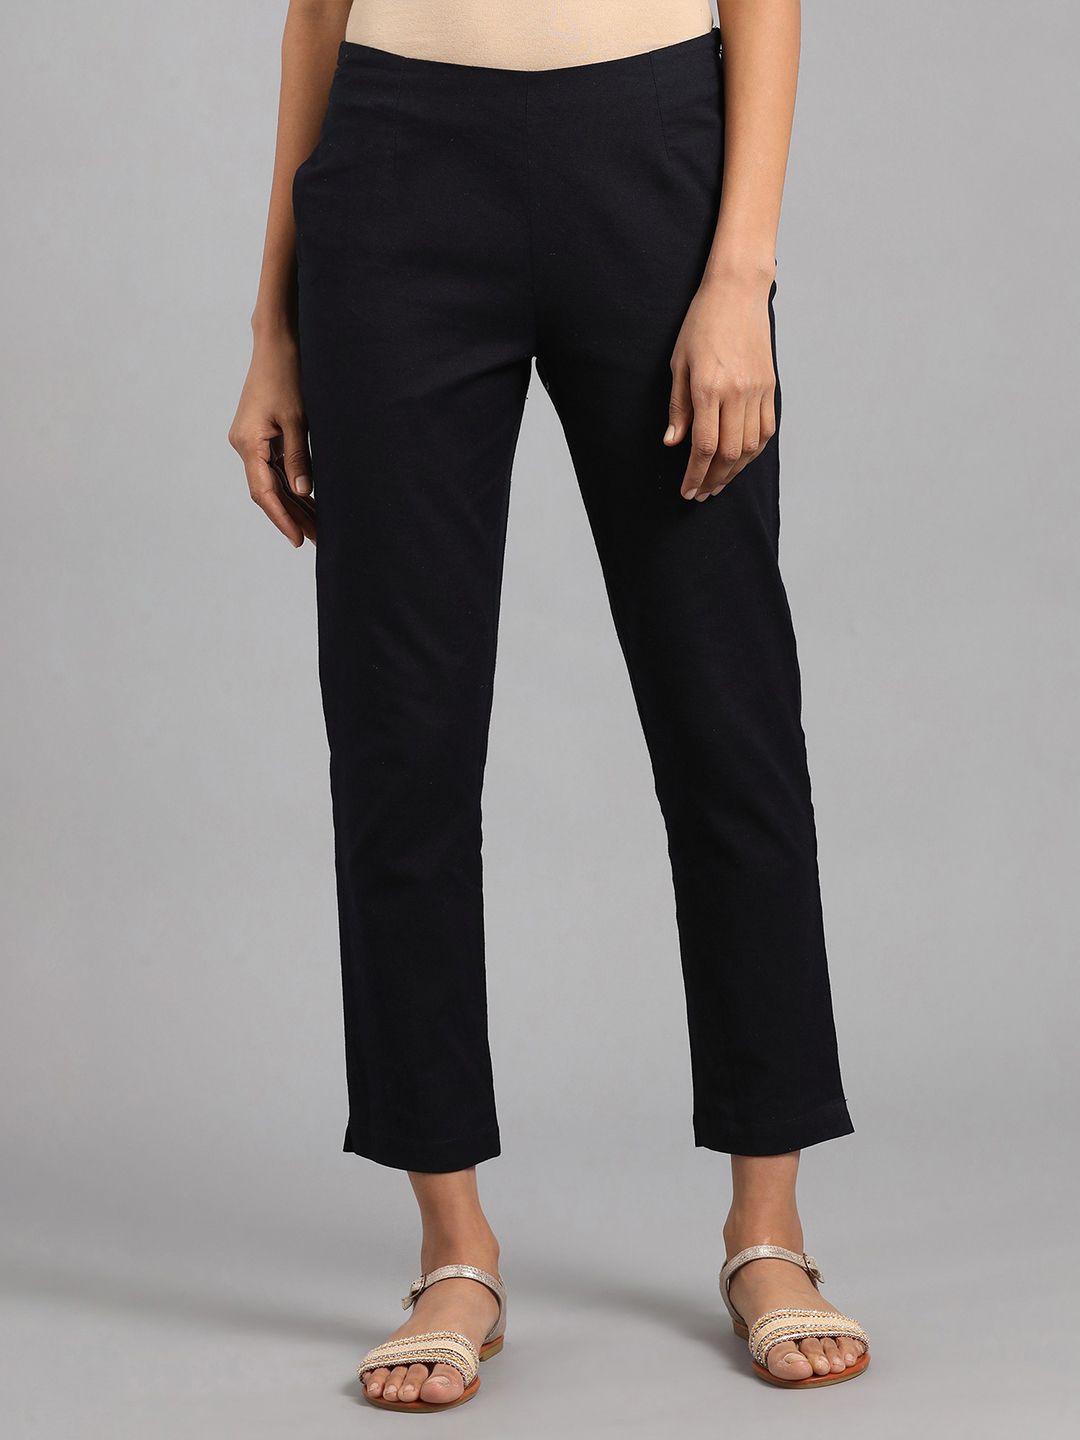 W Women Black Regular Cropped Trousers Price in India